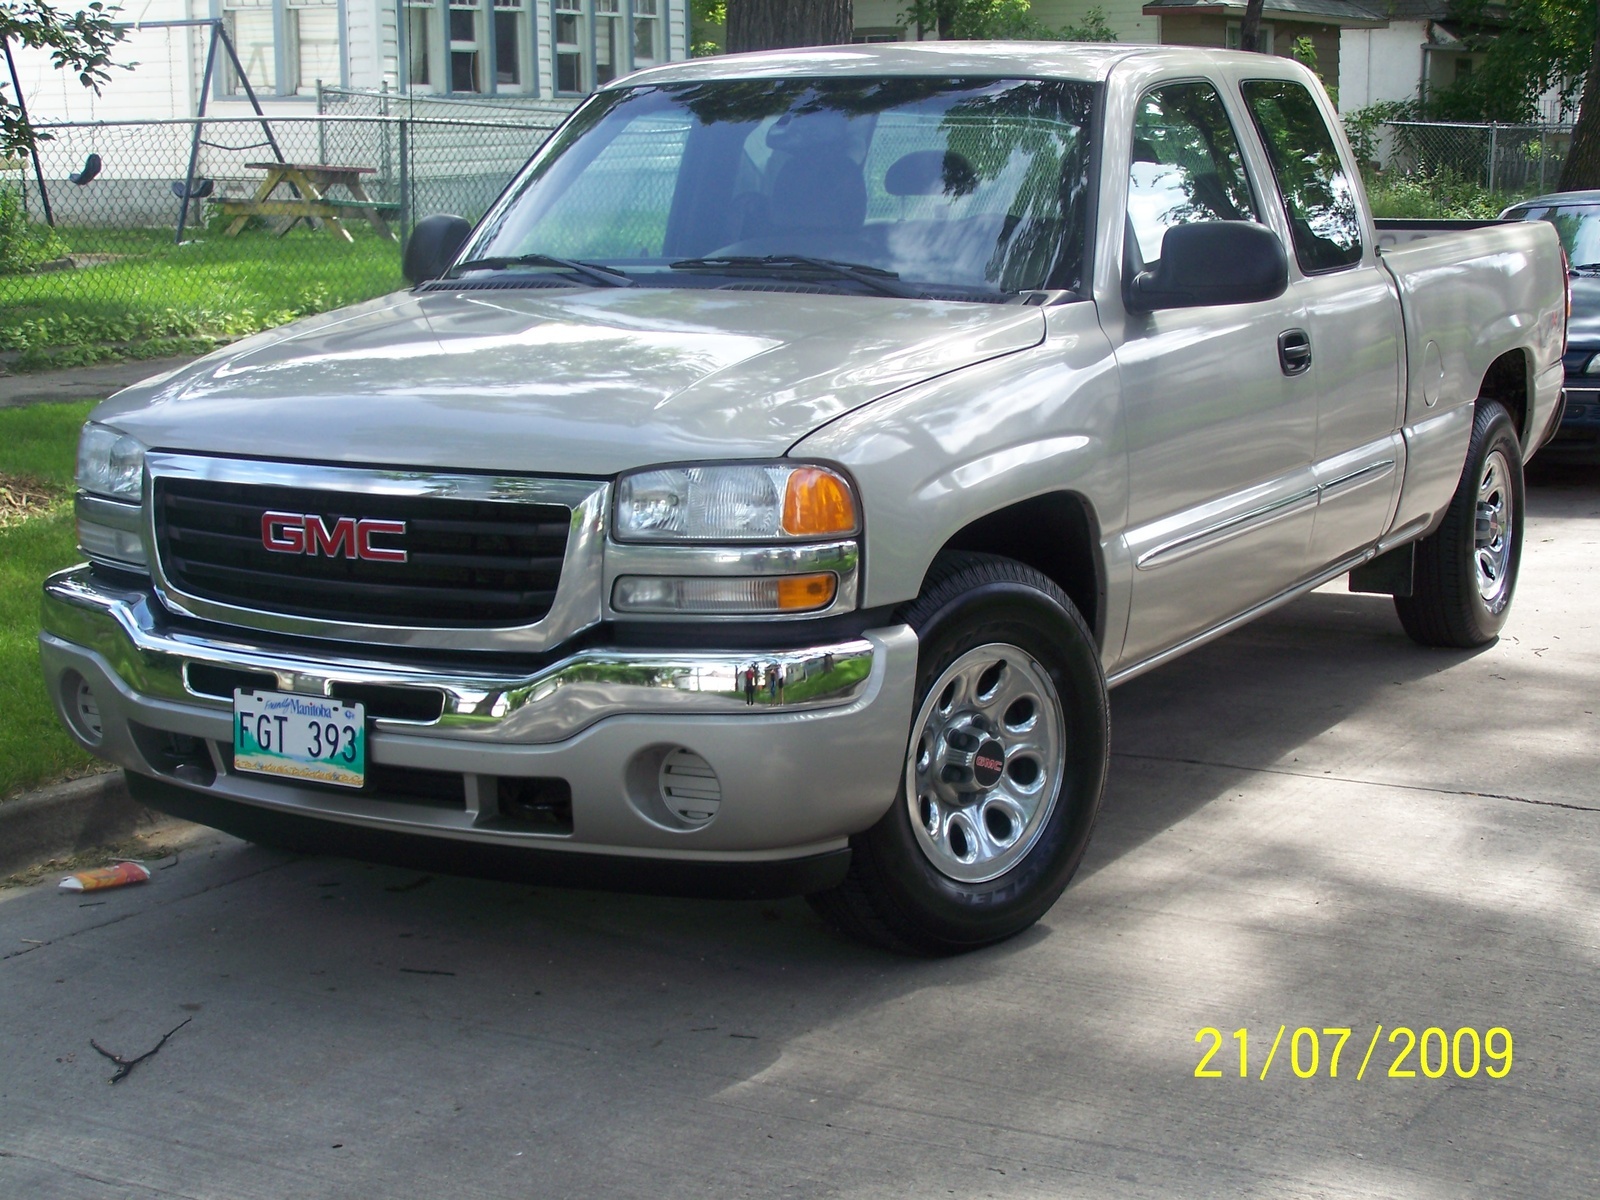 GMC Sierra 1500 Questions - just bought a 06 GMC Sierra 4x4 extended cab  1500 SLE, are there any ... - CarGurus